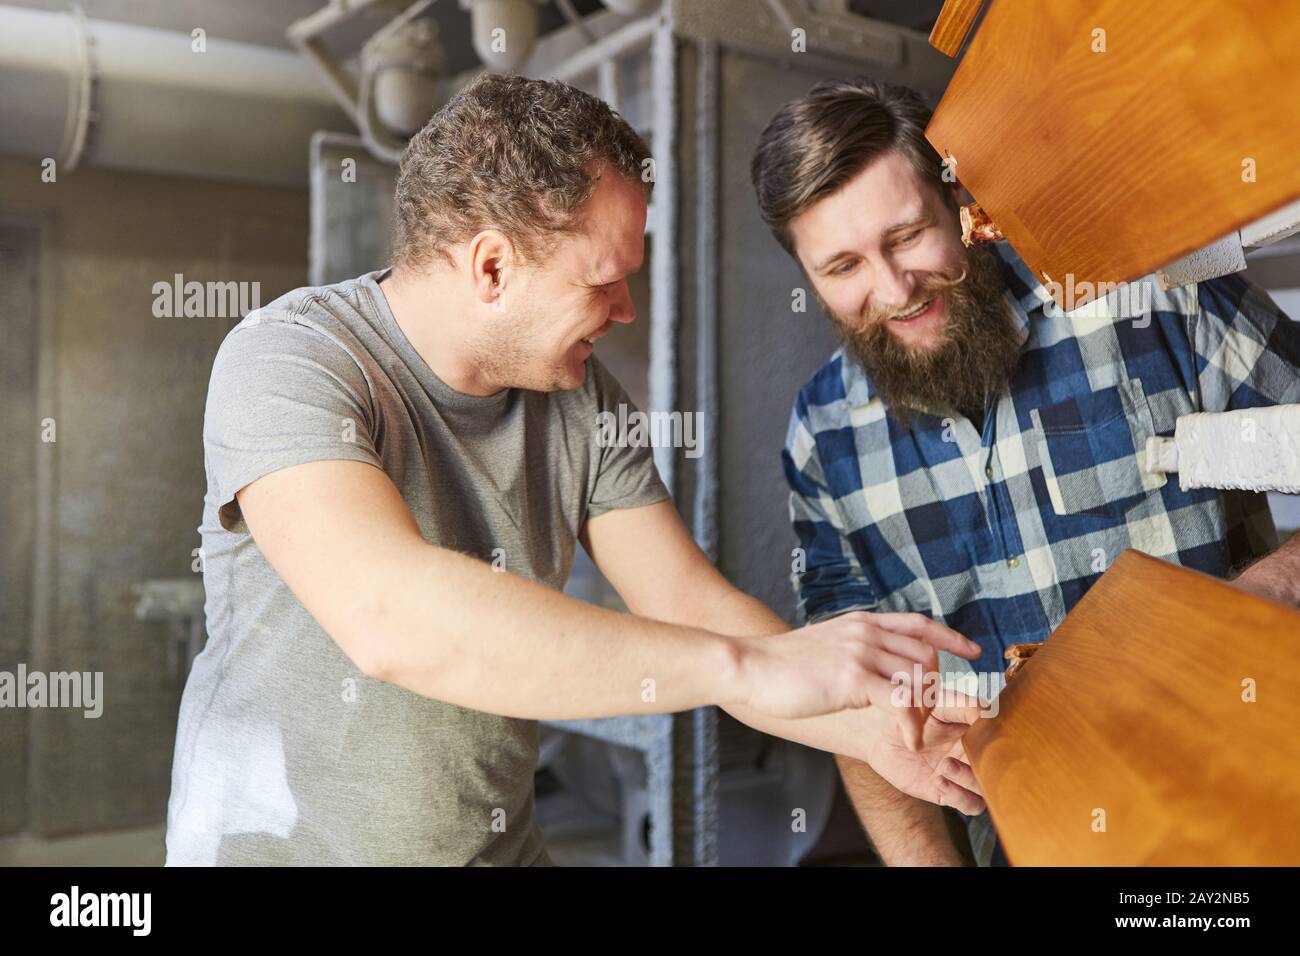 Carpenter apprentice and instructor check a wooden board in the carpentry Stock Photo